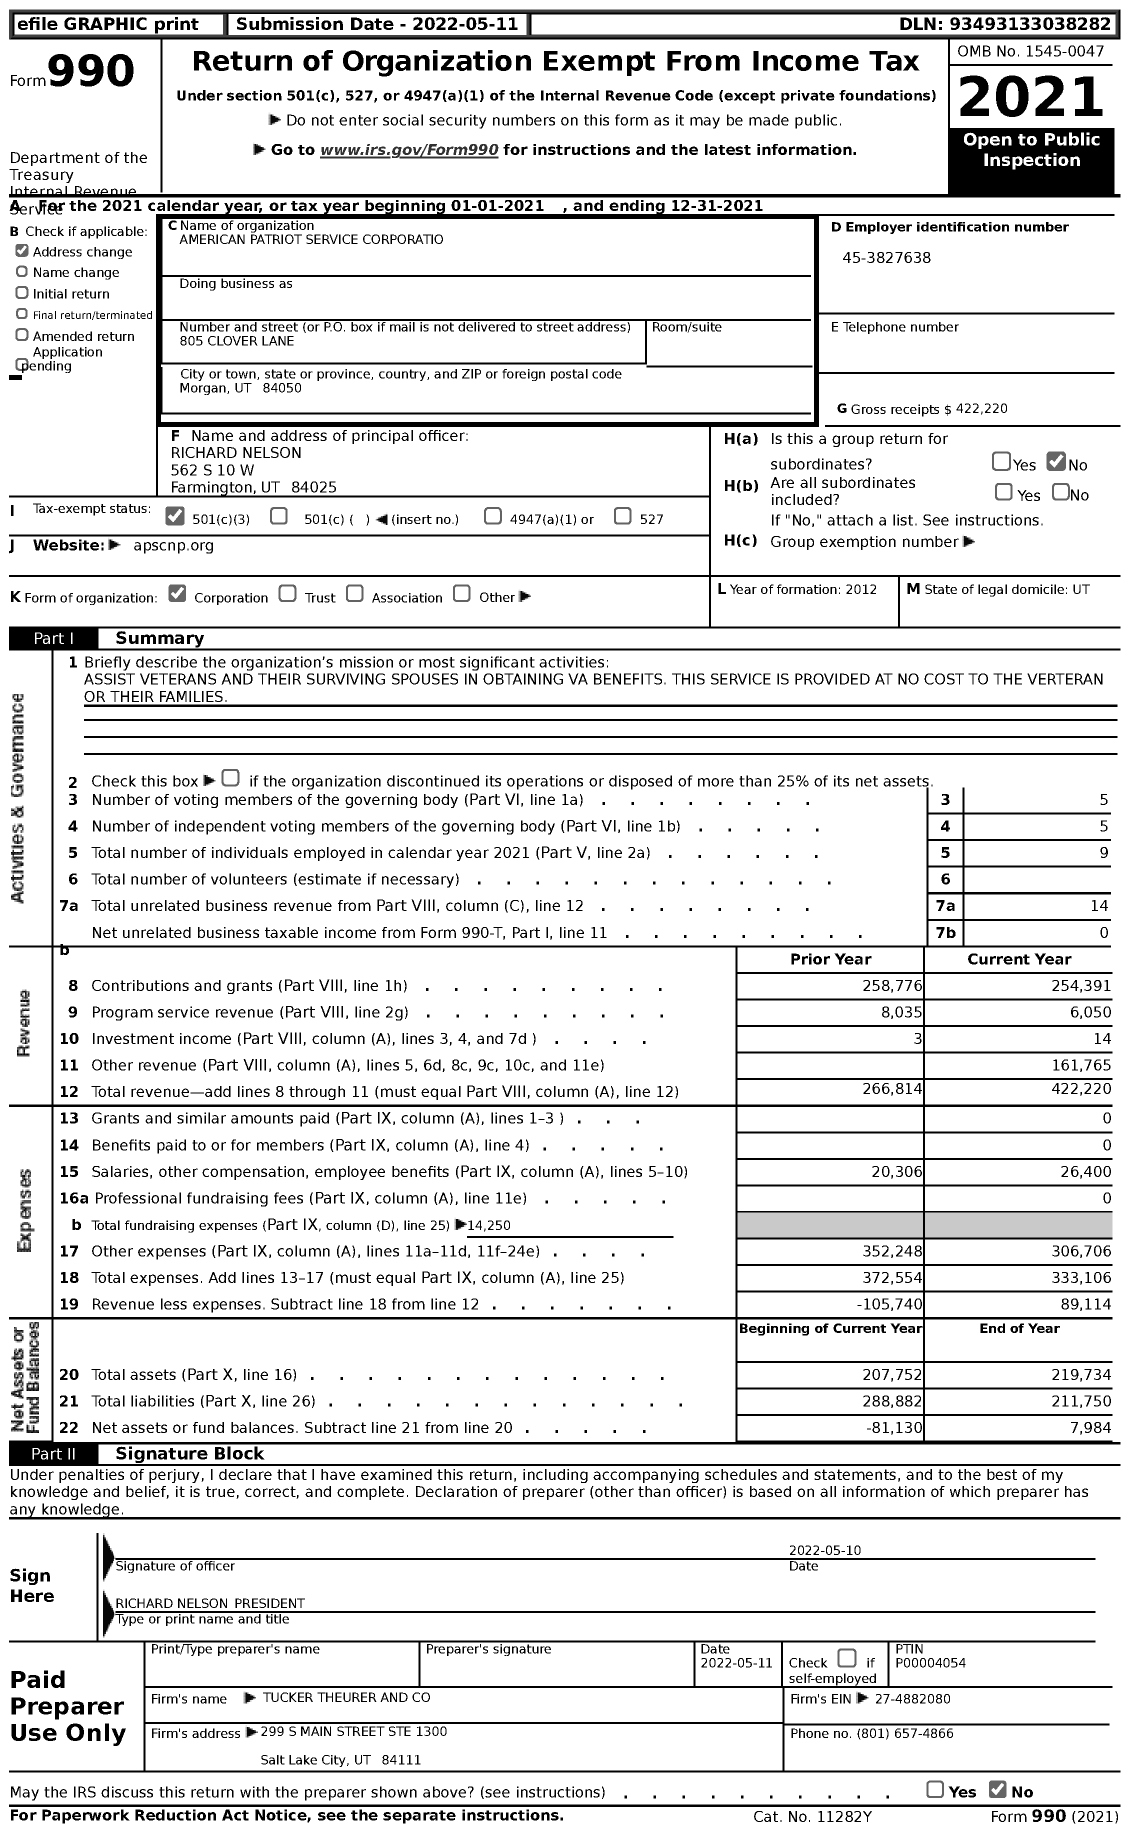 Image of first page of 2021 Form 990 for American Patriot Service Corporation